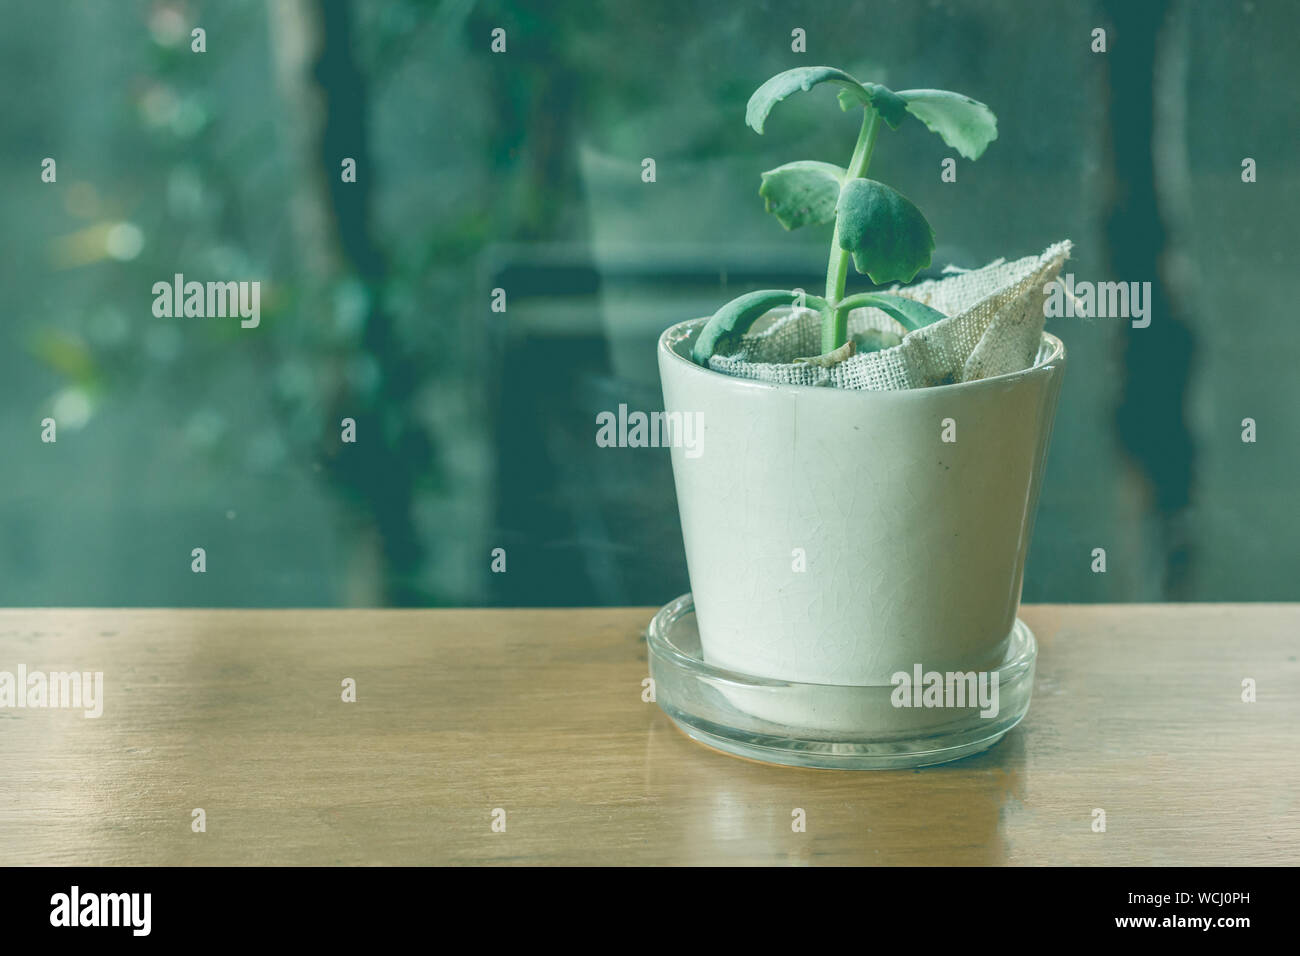 Close-up Of Houseplant On Table Stock Photo